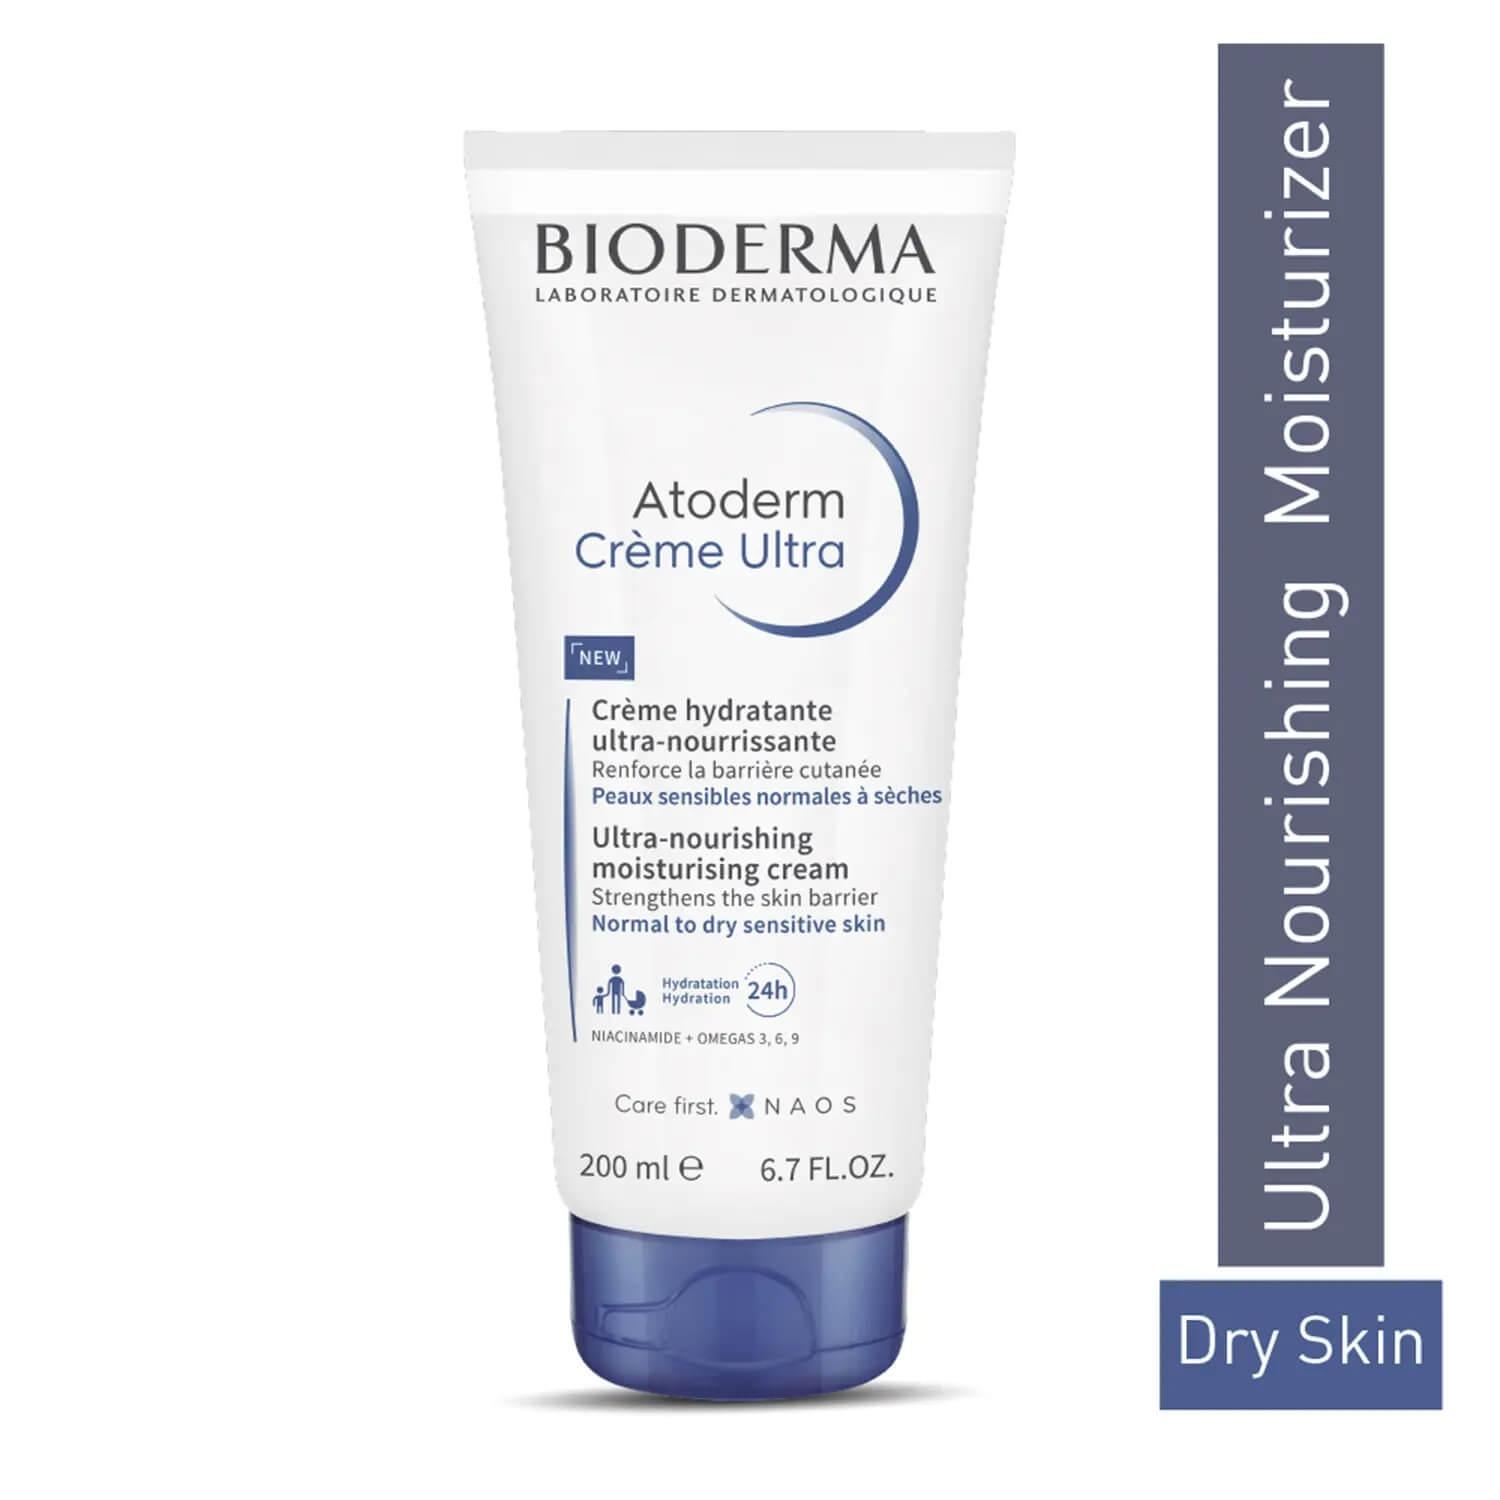 bioderma atoderm creme ultra daily hydrating moisturizer for normal to sensitive dry skin, 200ml